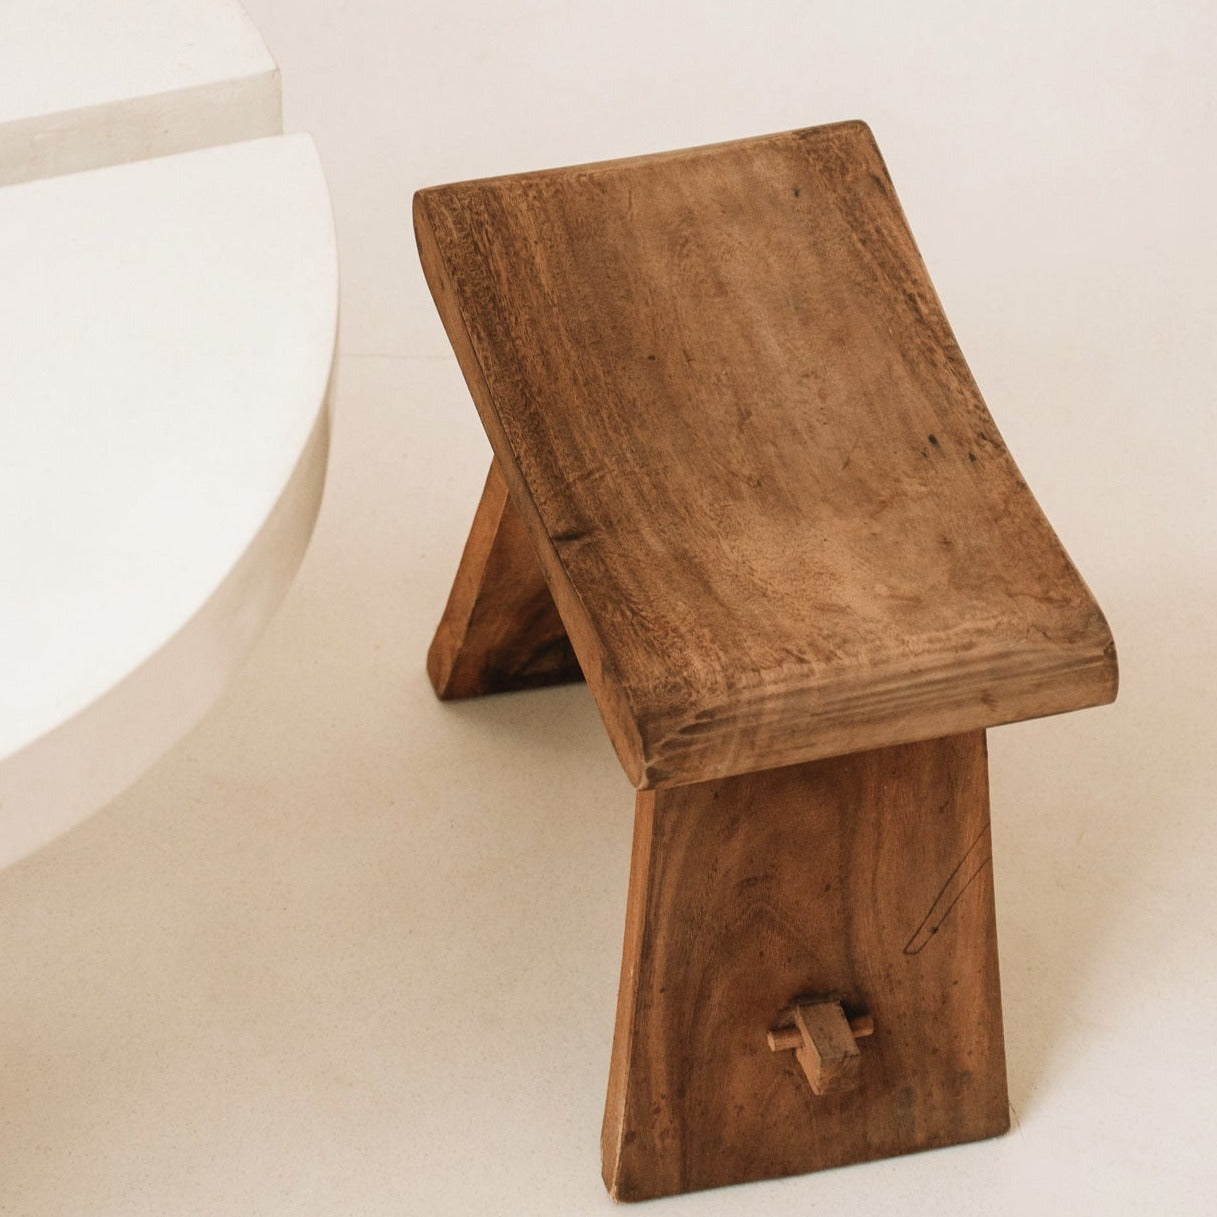 Copy of THE SUAR Stool half side, top view